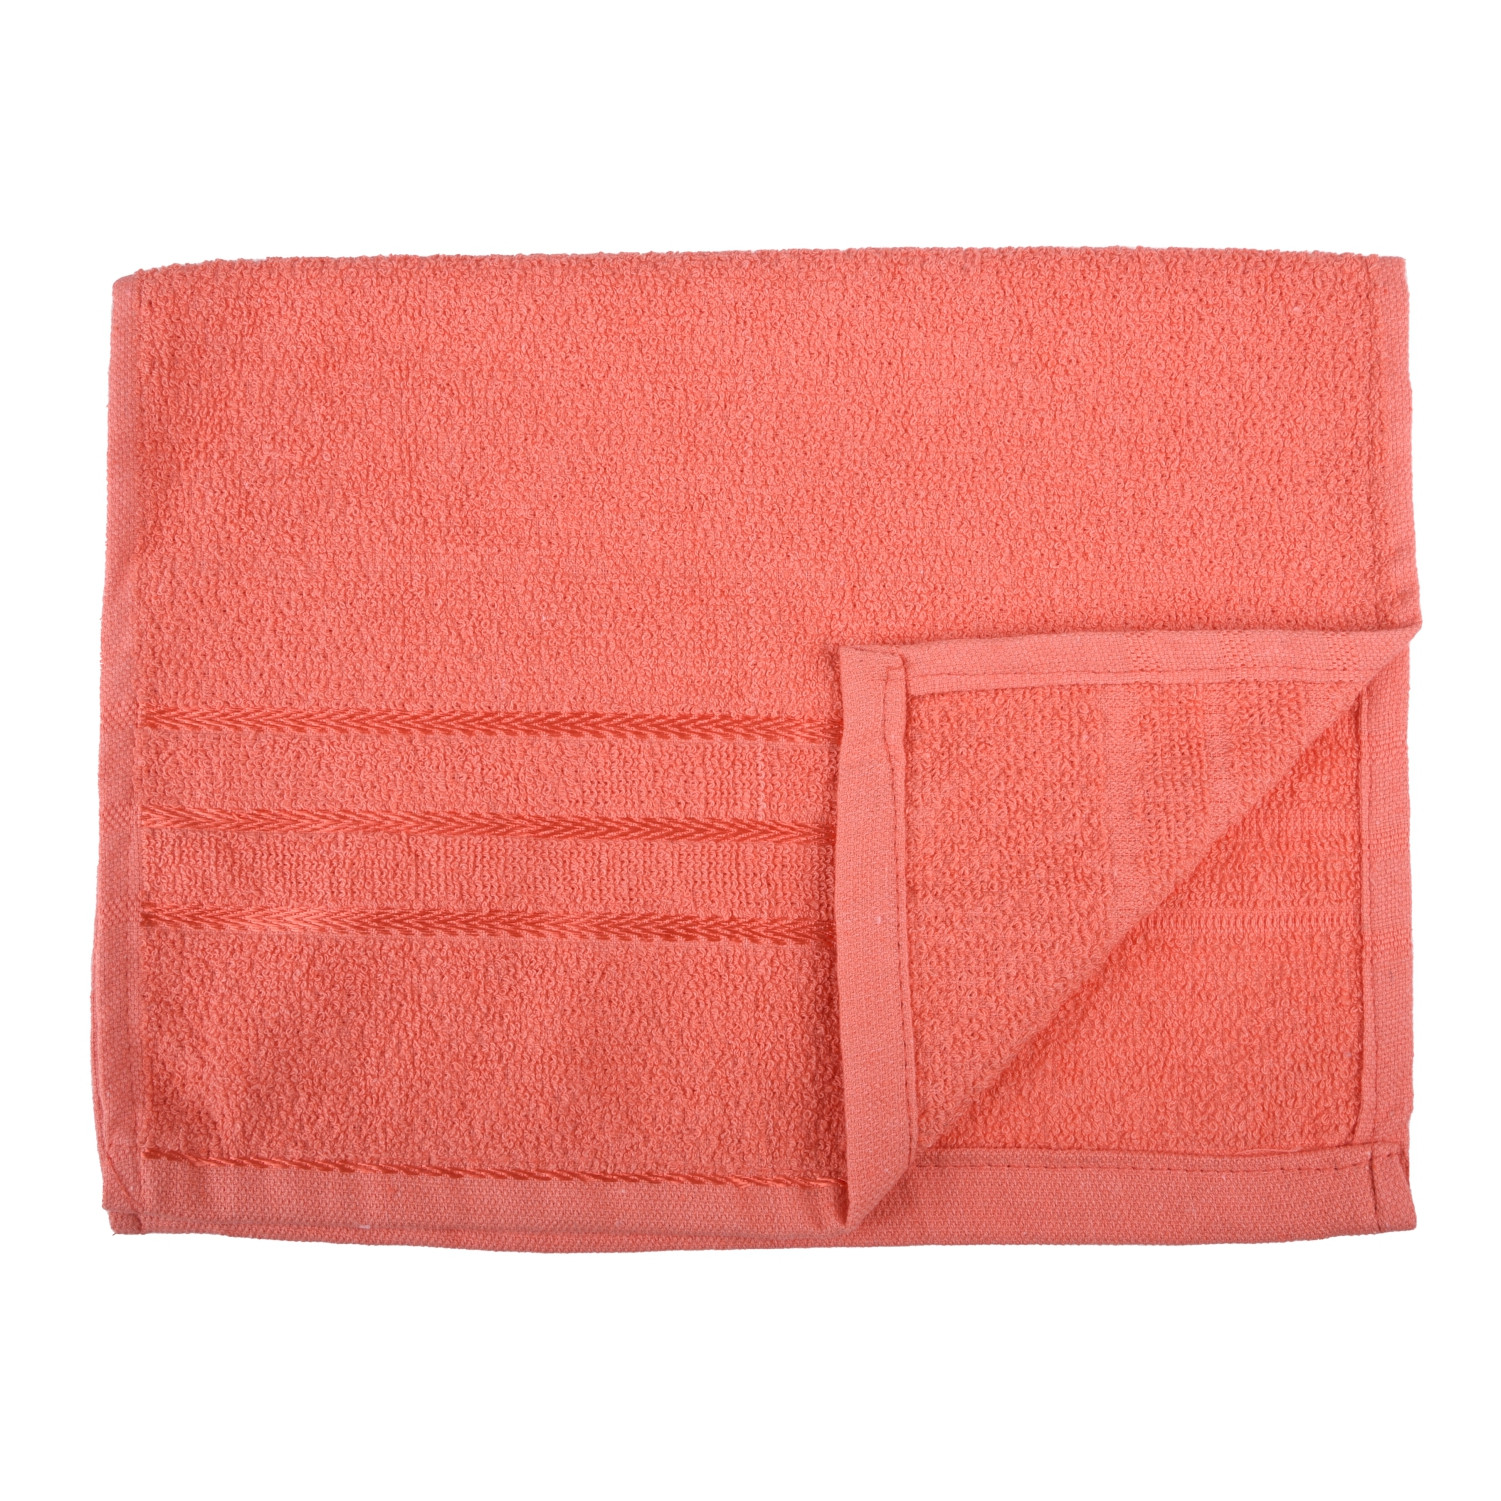 Kuber Industries Face Towel | Towels for Facewash | Towels for Gym | Facewash for Travel | Towels for Daily use | Workout Hand Towel | Lining Design | 14x21 Inch| Orange